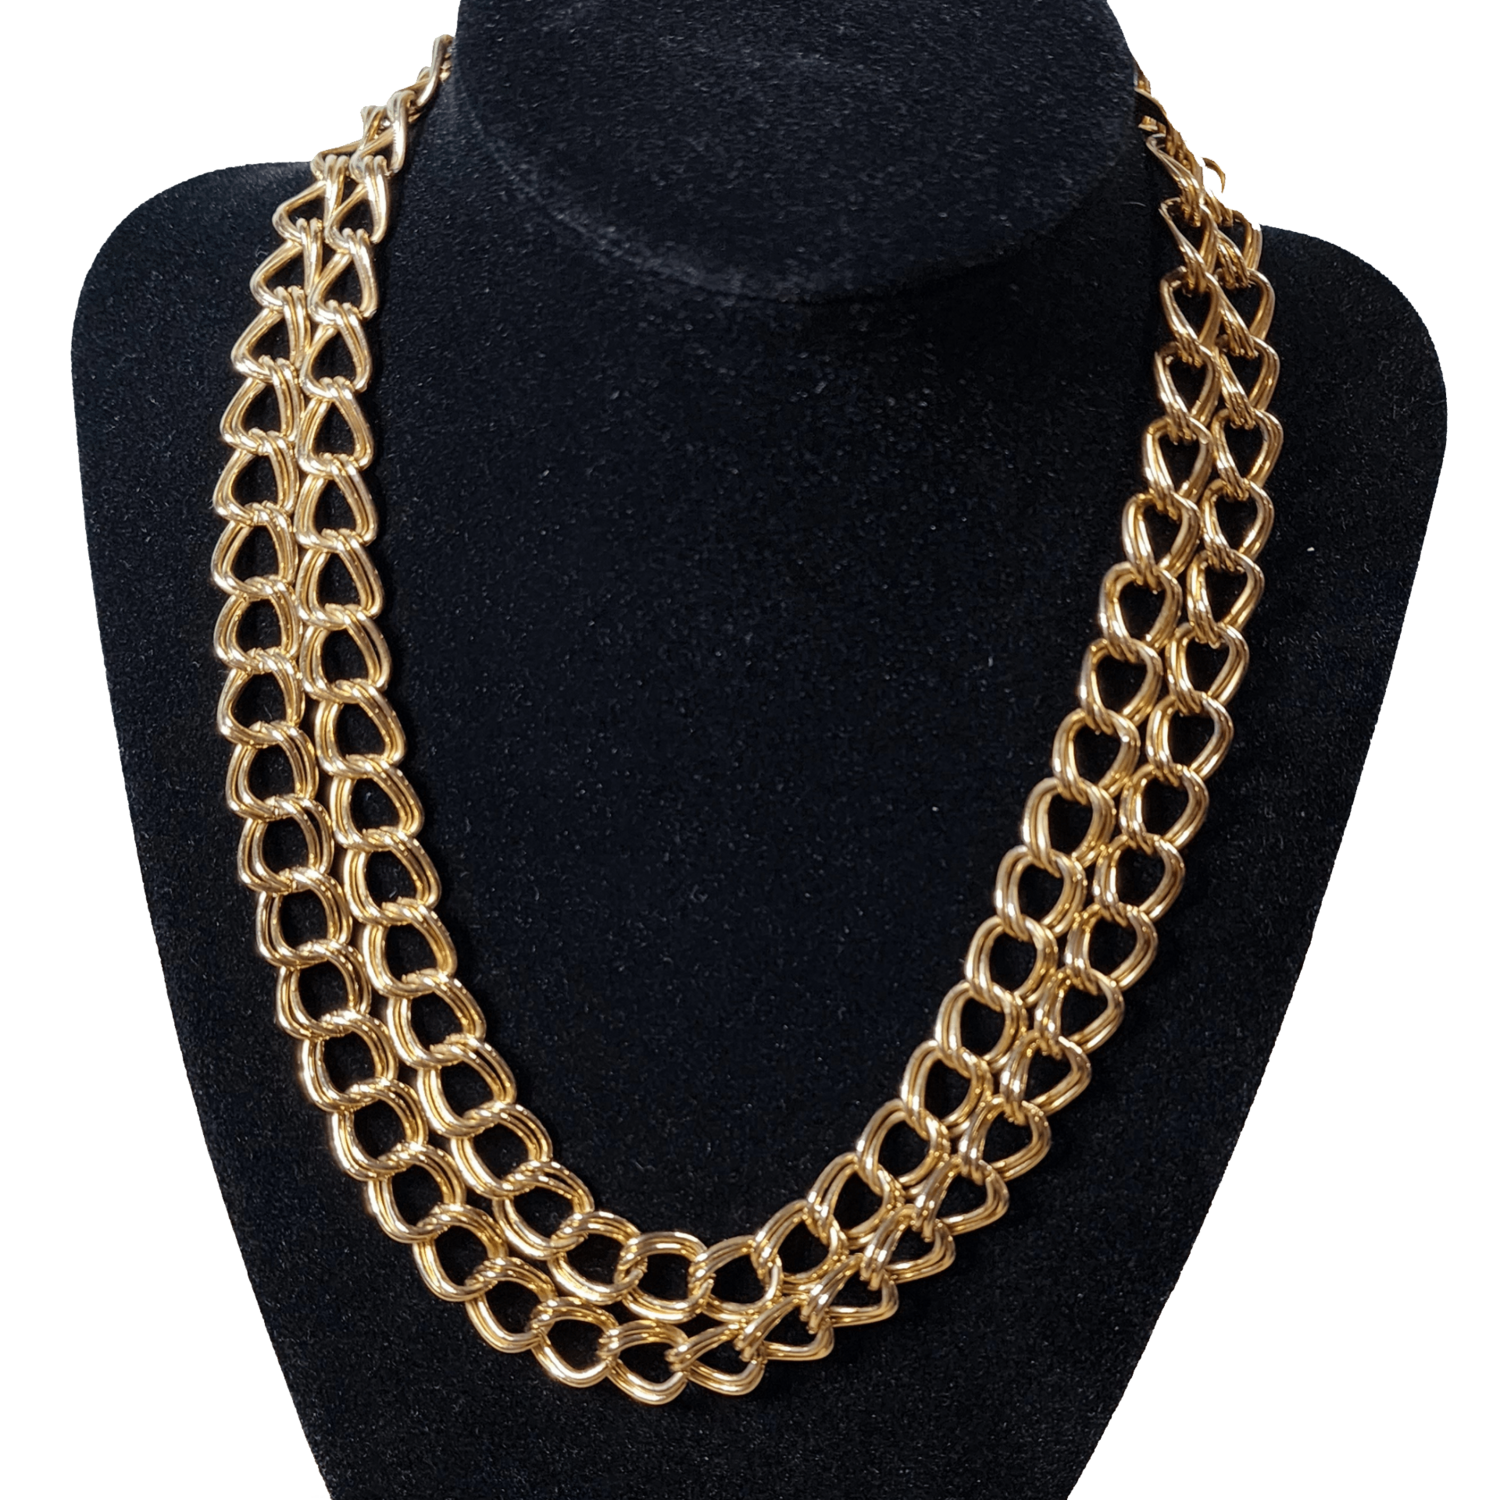 Vintage Two-Stranded Gold-toned Rolo Chain Choker/Necklace c. 1980's